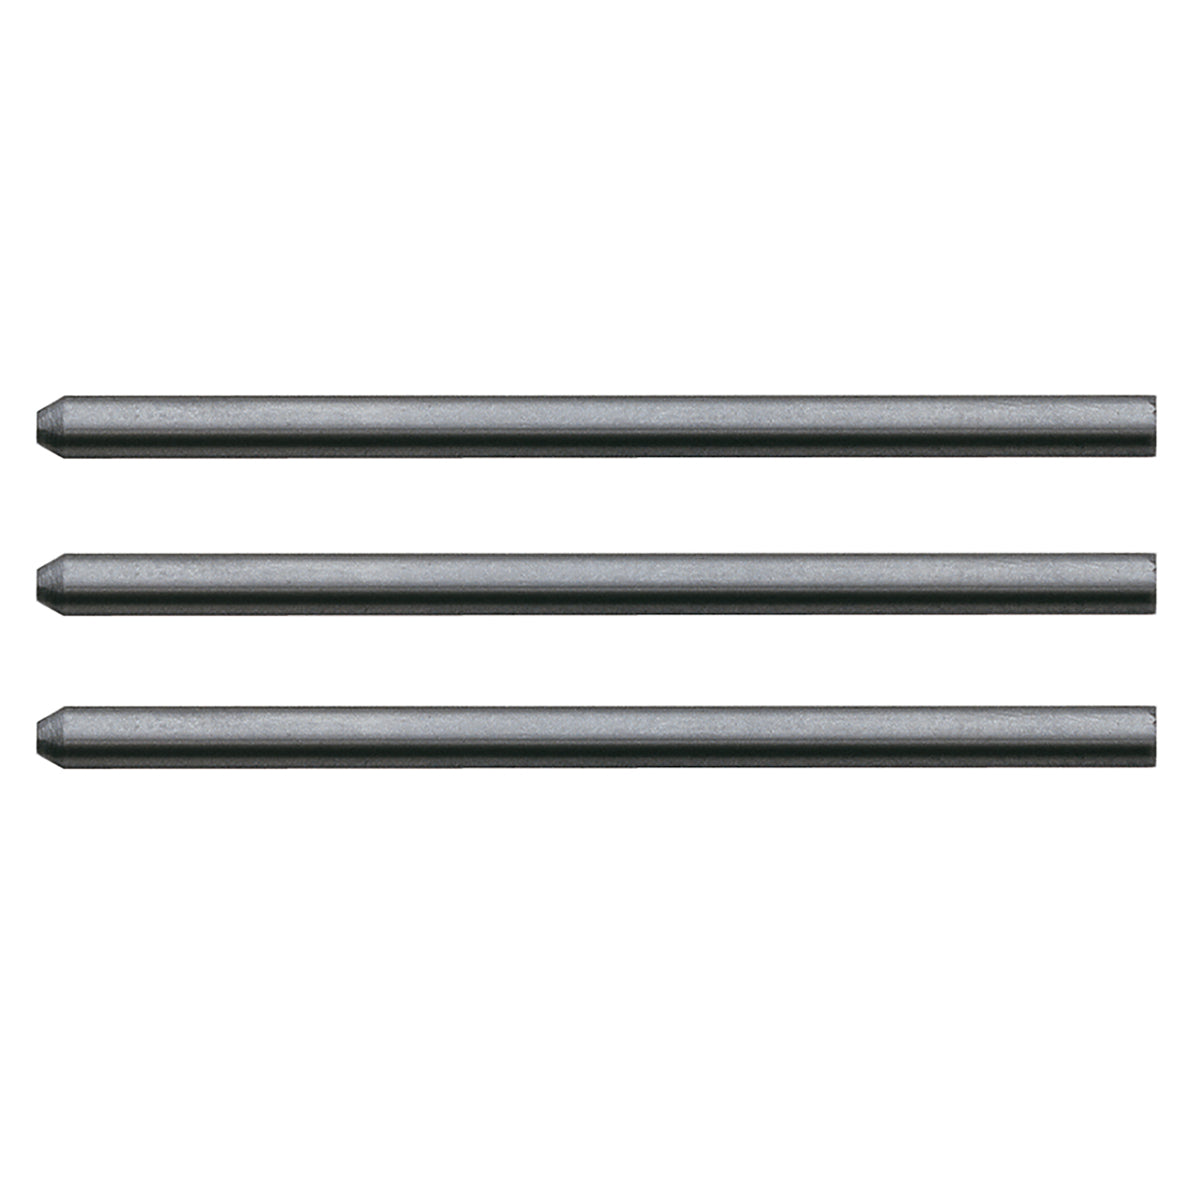 Lamy M 43 3.15 MM 4B Lead Refills For 3.15 Mechanical Pencils, Tube of 3 Leads  Lamy Leads